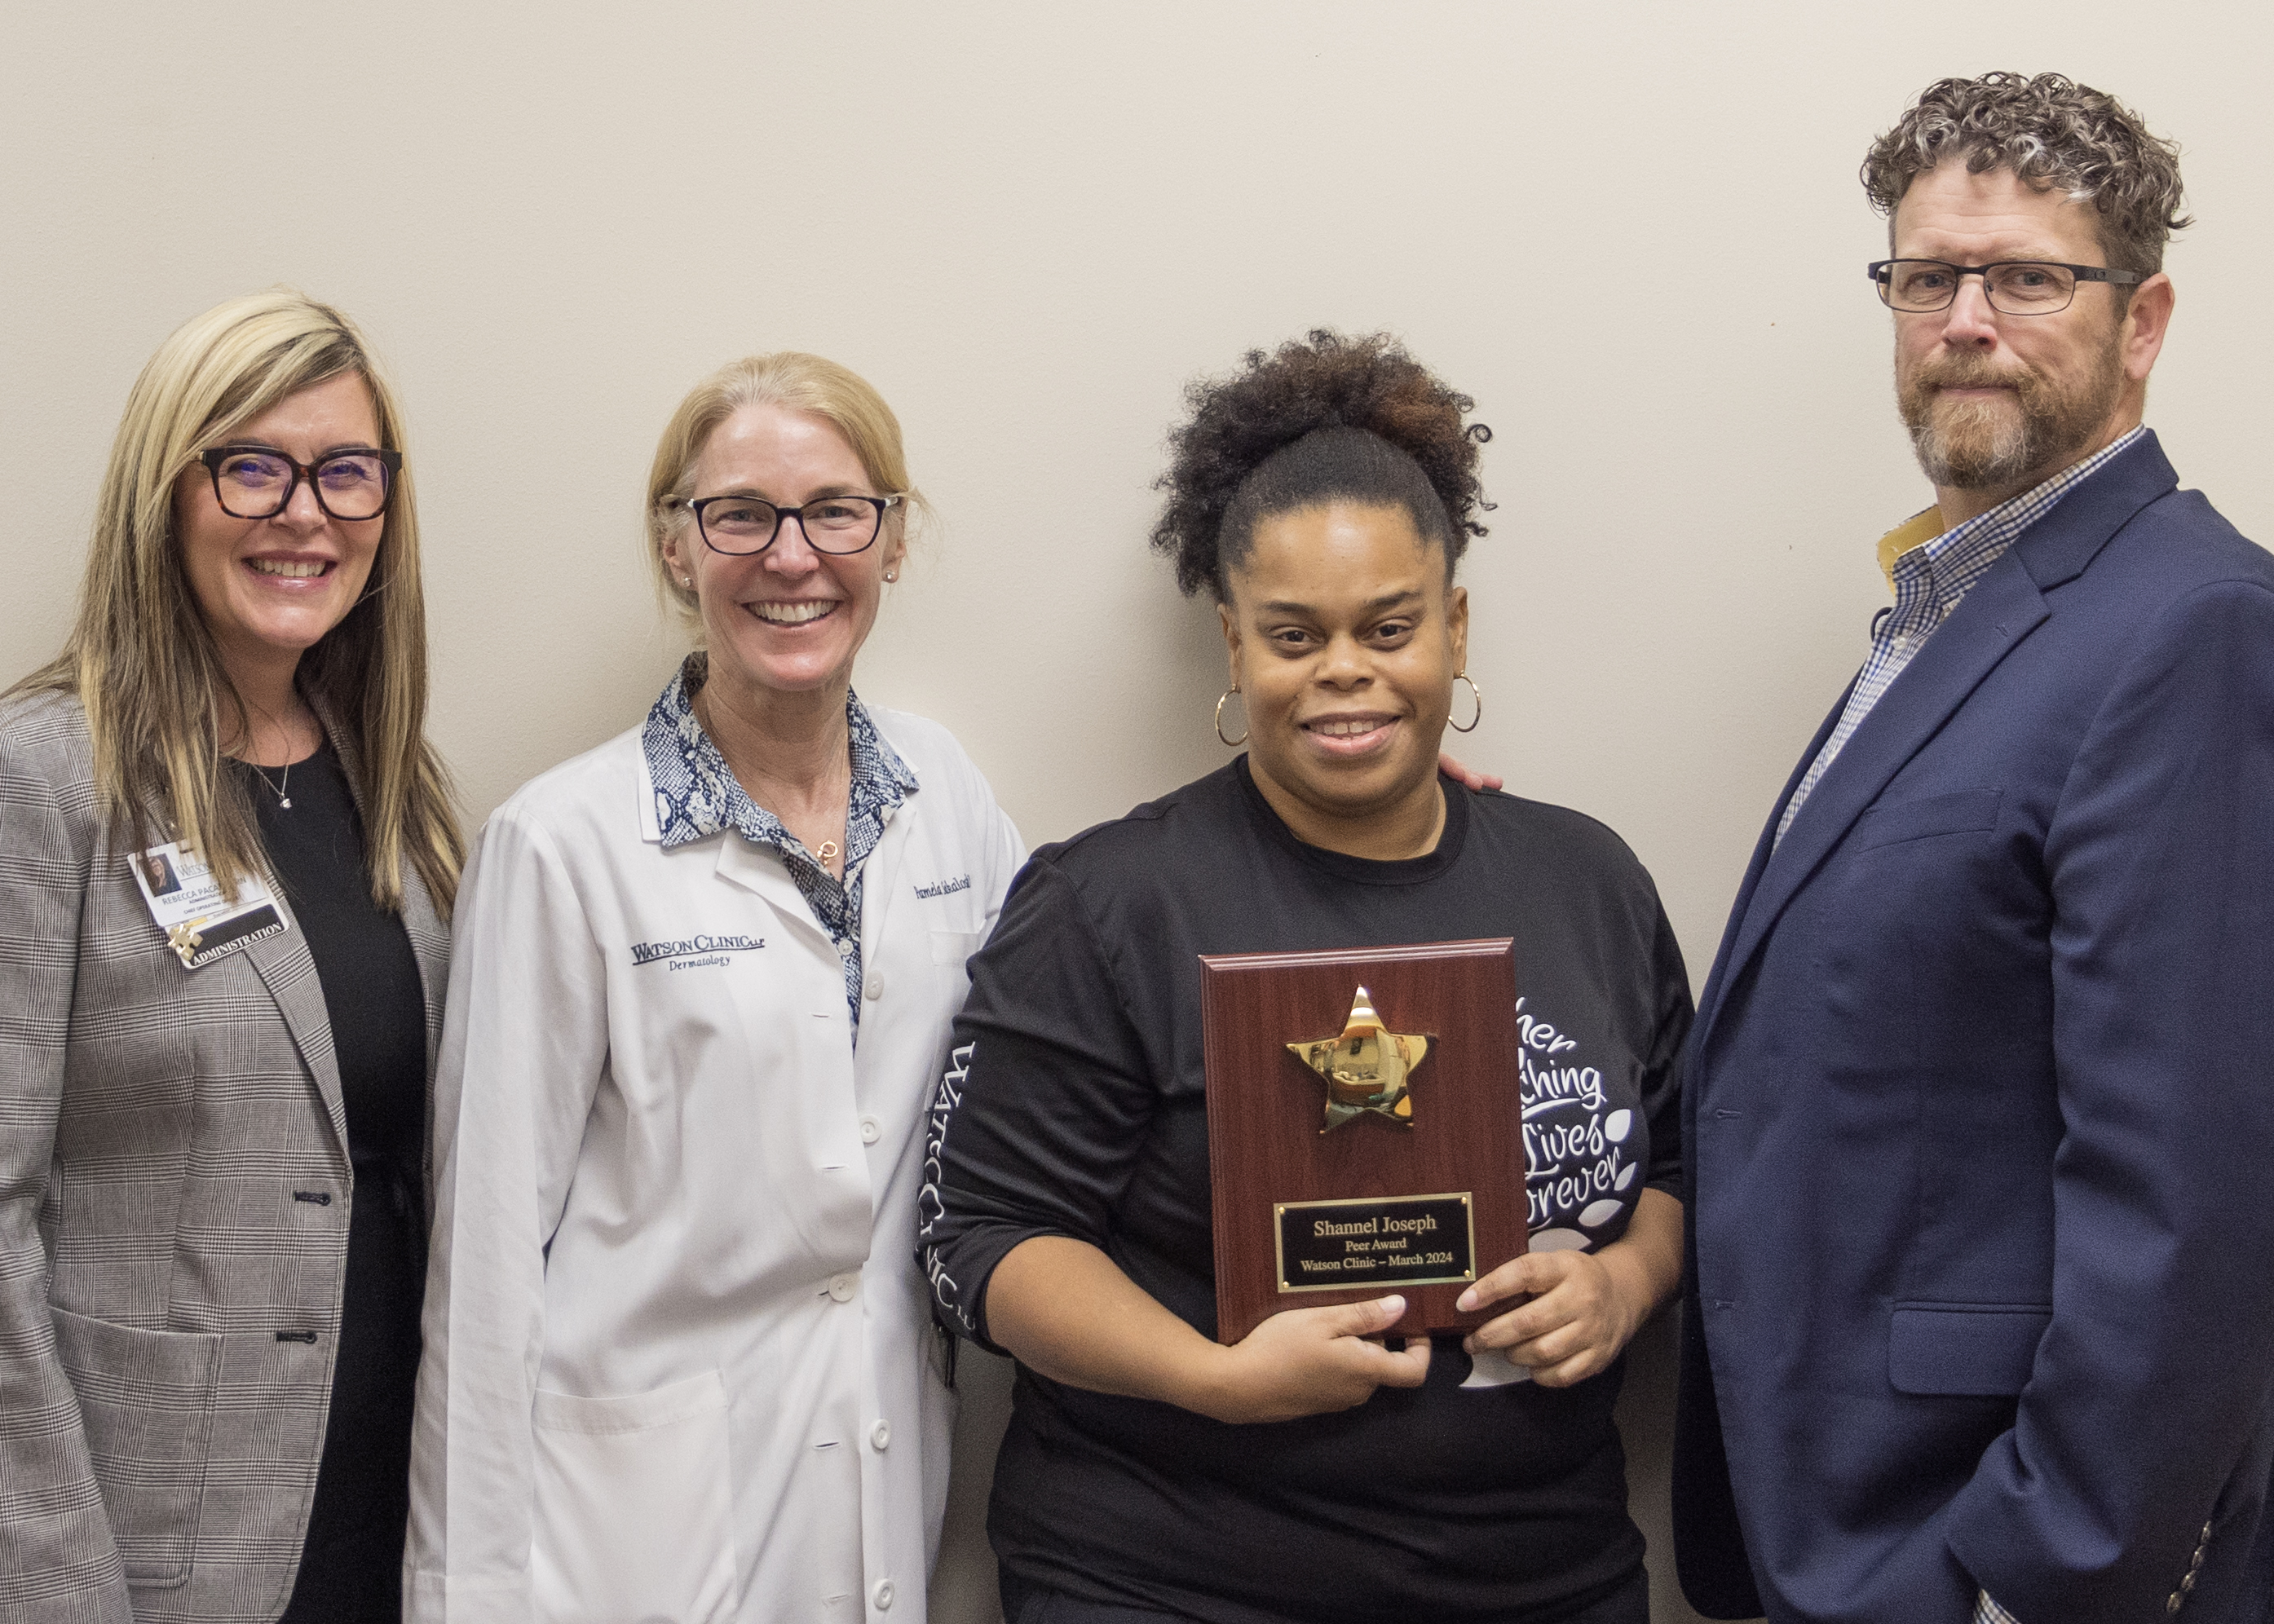 Shannel Joseph (center) is pictured in the attached photo proudly displaying her PEER Award plaque alongside Watson Clinic Chief Operating Officer Rebecca Pacatte (far left), Bella Vista Building Dermatologist Pamela Sakalosky, MD (second from left), and Chief Executive Officer Jason Hirsbrunner (right). 